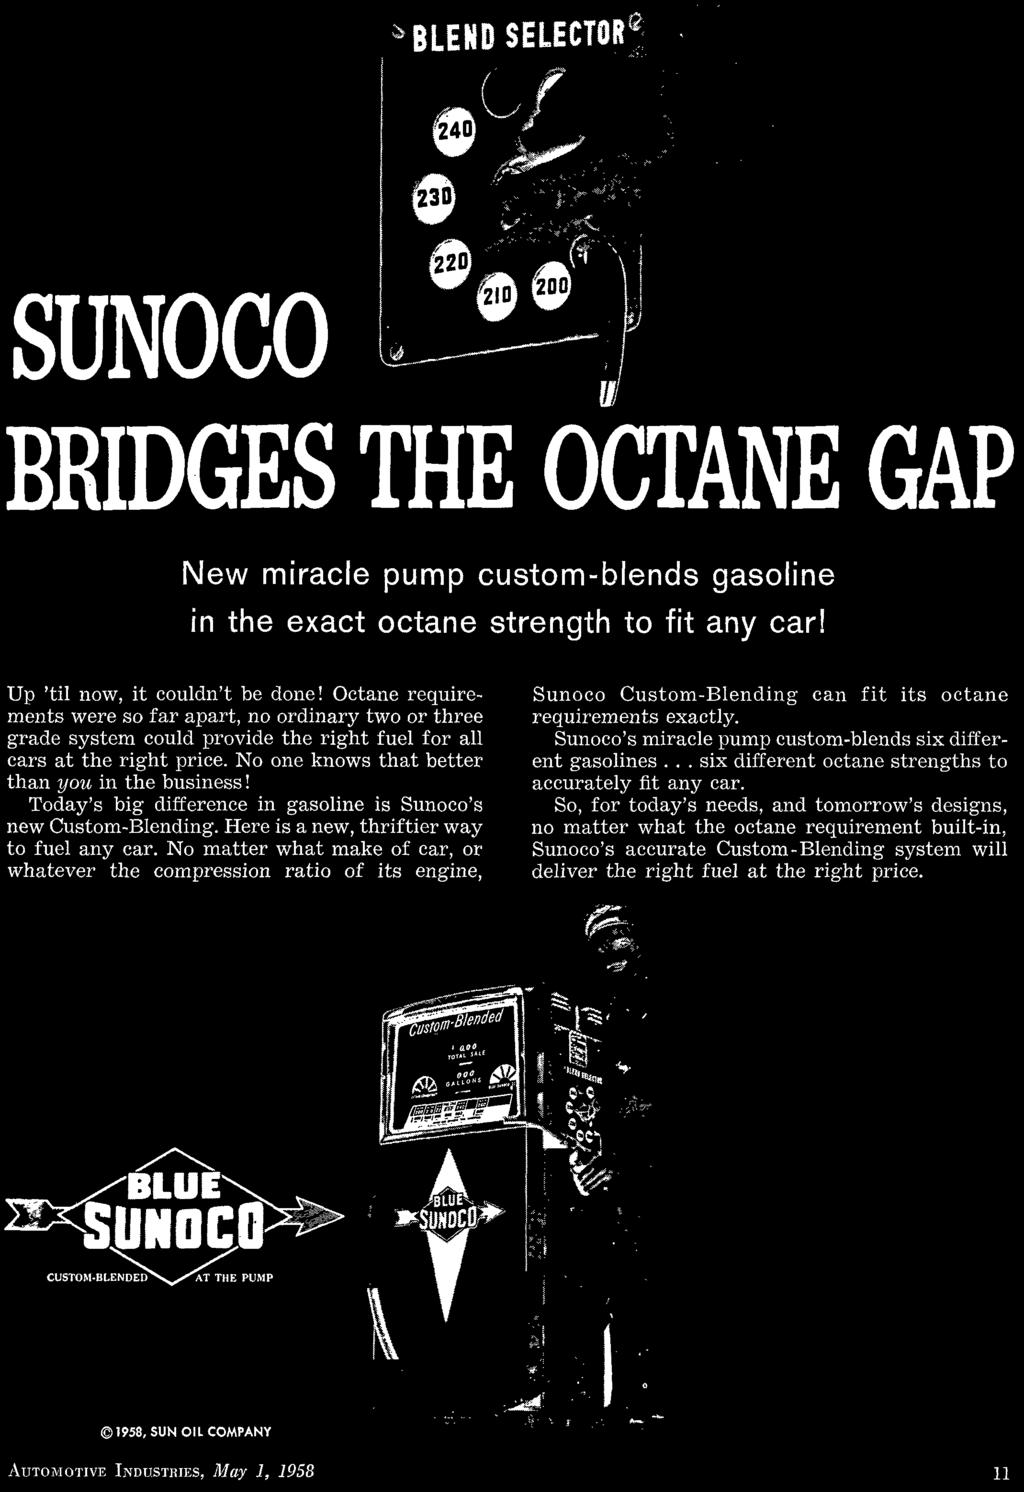 Sunoco's miracle pump custom-blends six different gasolines... six different octane strengths to accurately fit any car.